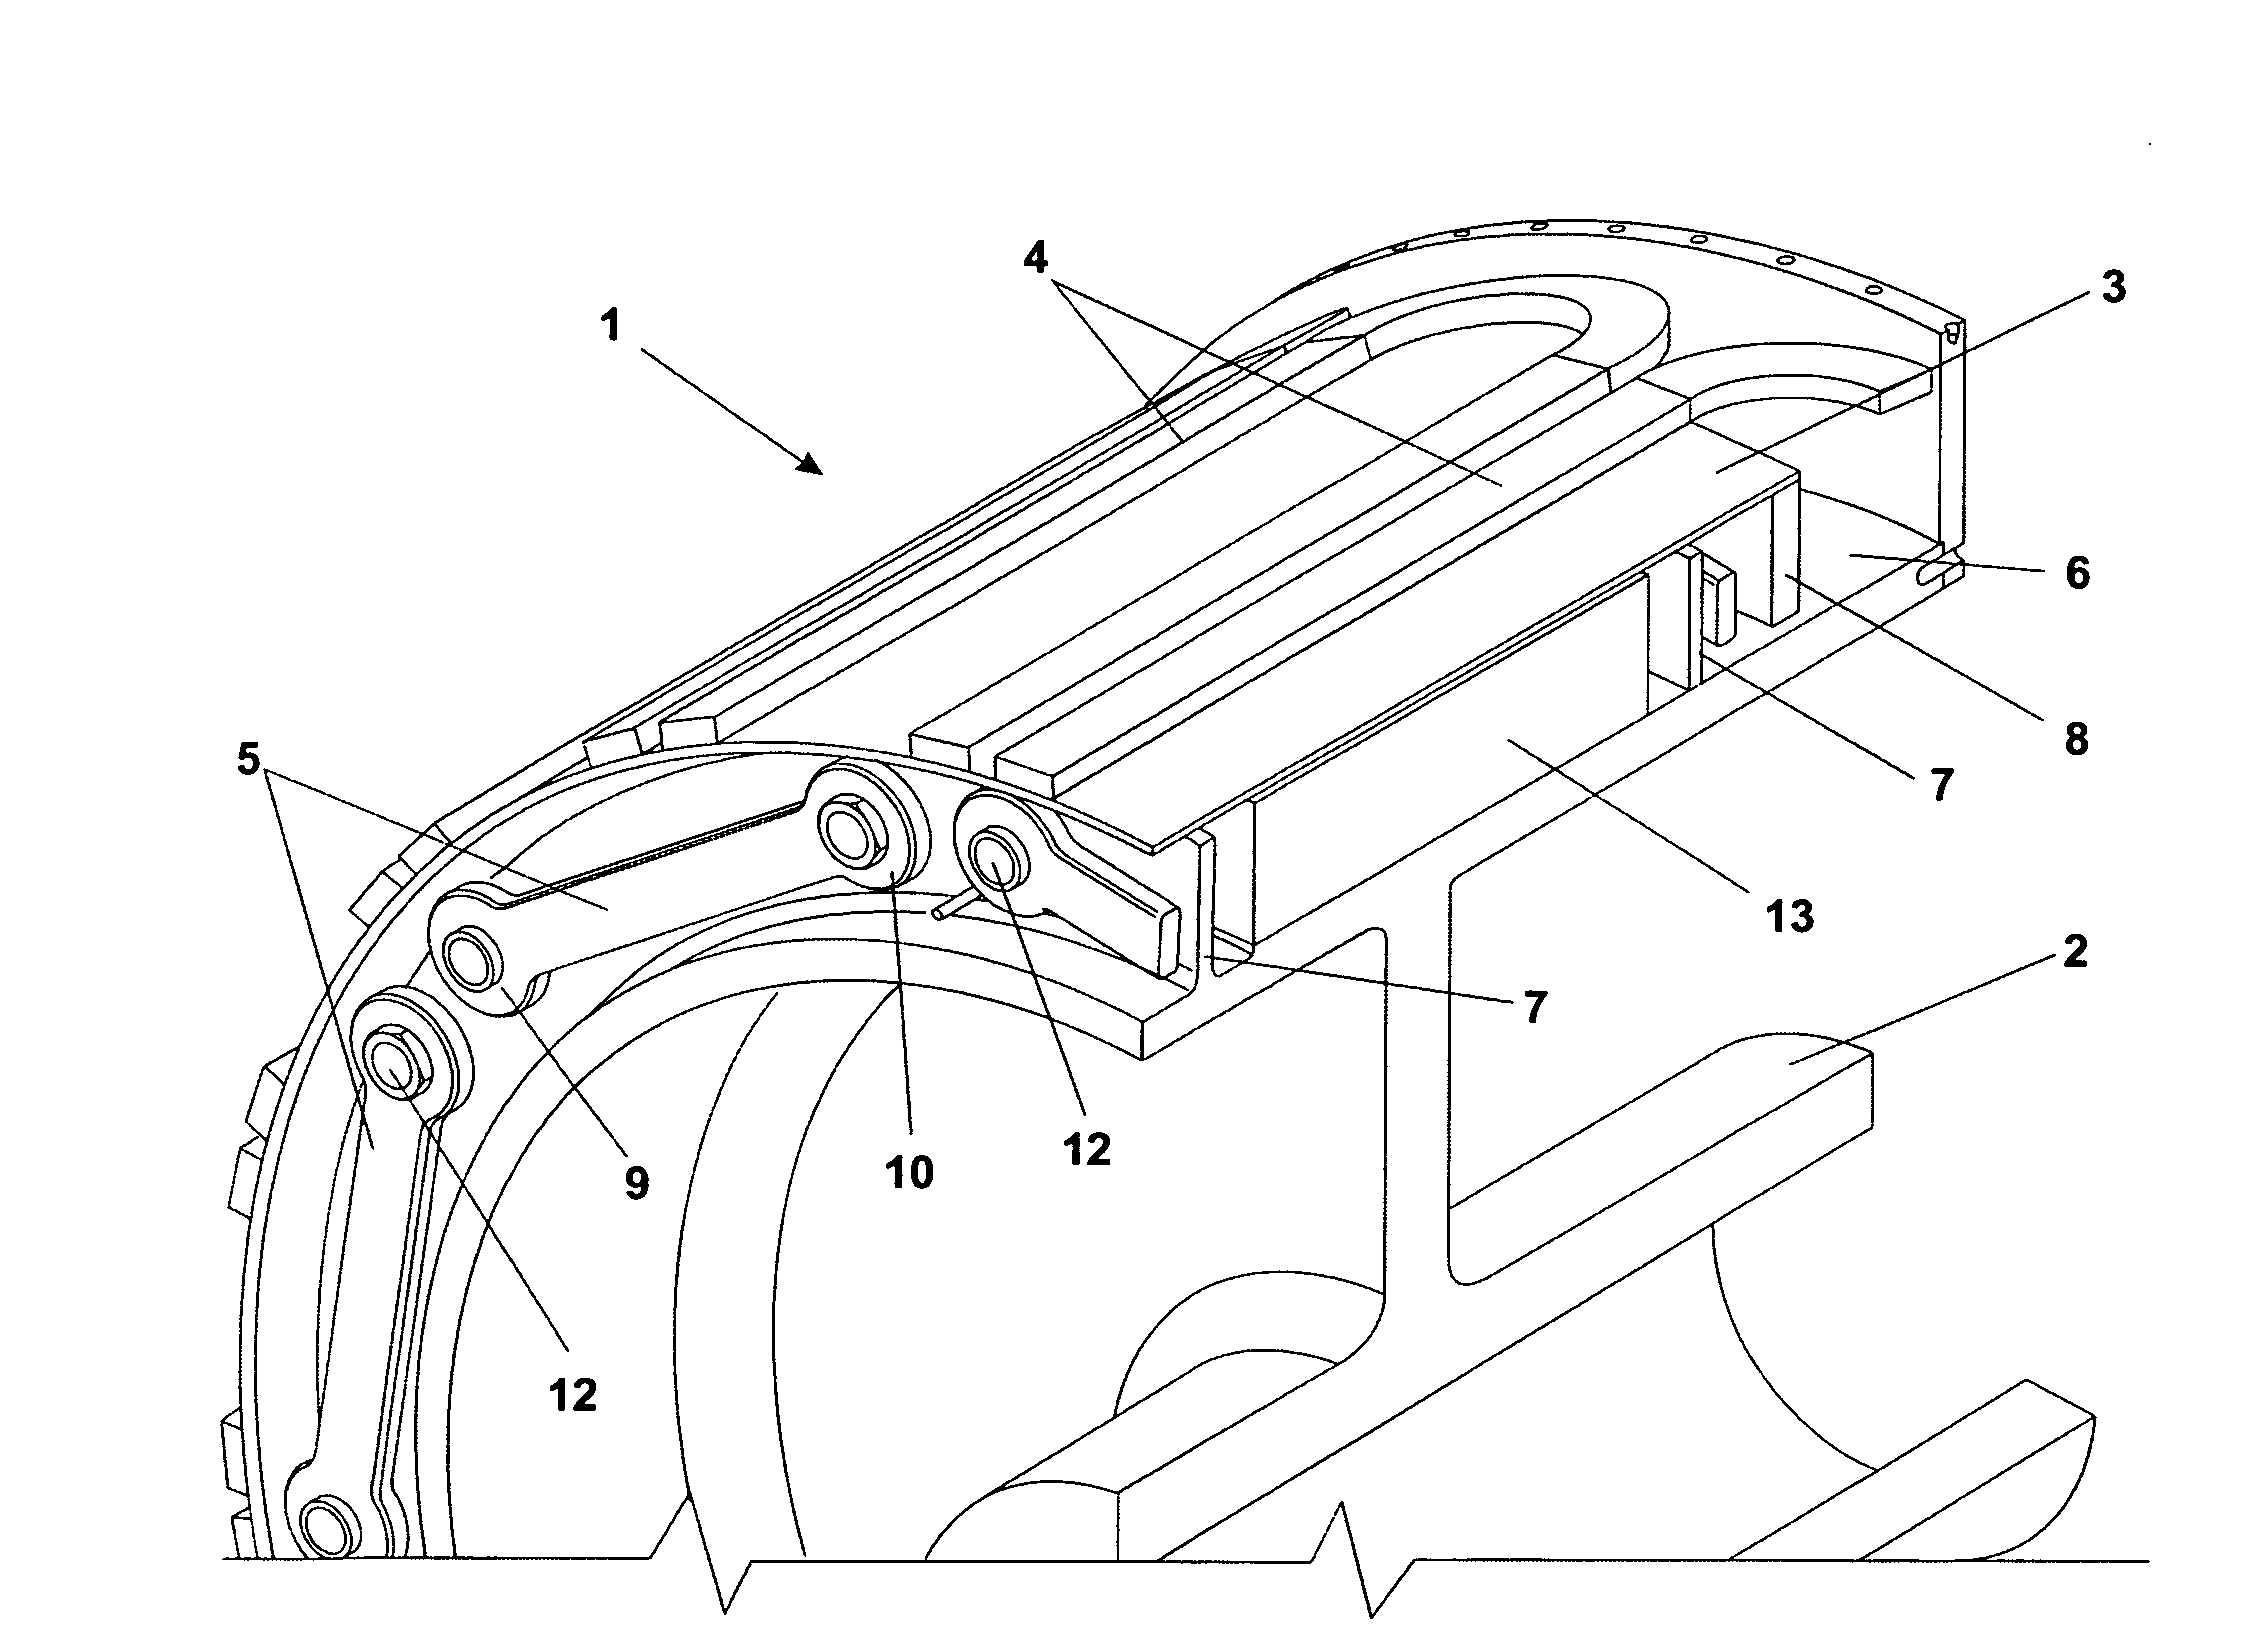 Rotor or a stator for a superconducting electrical machine